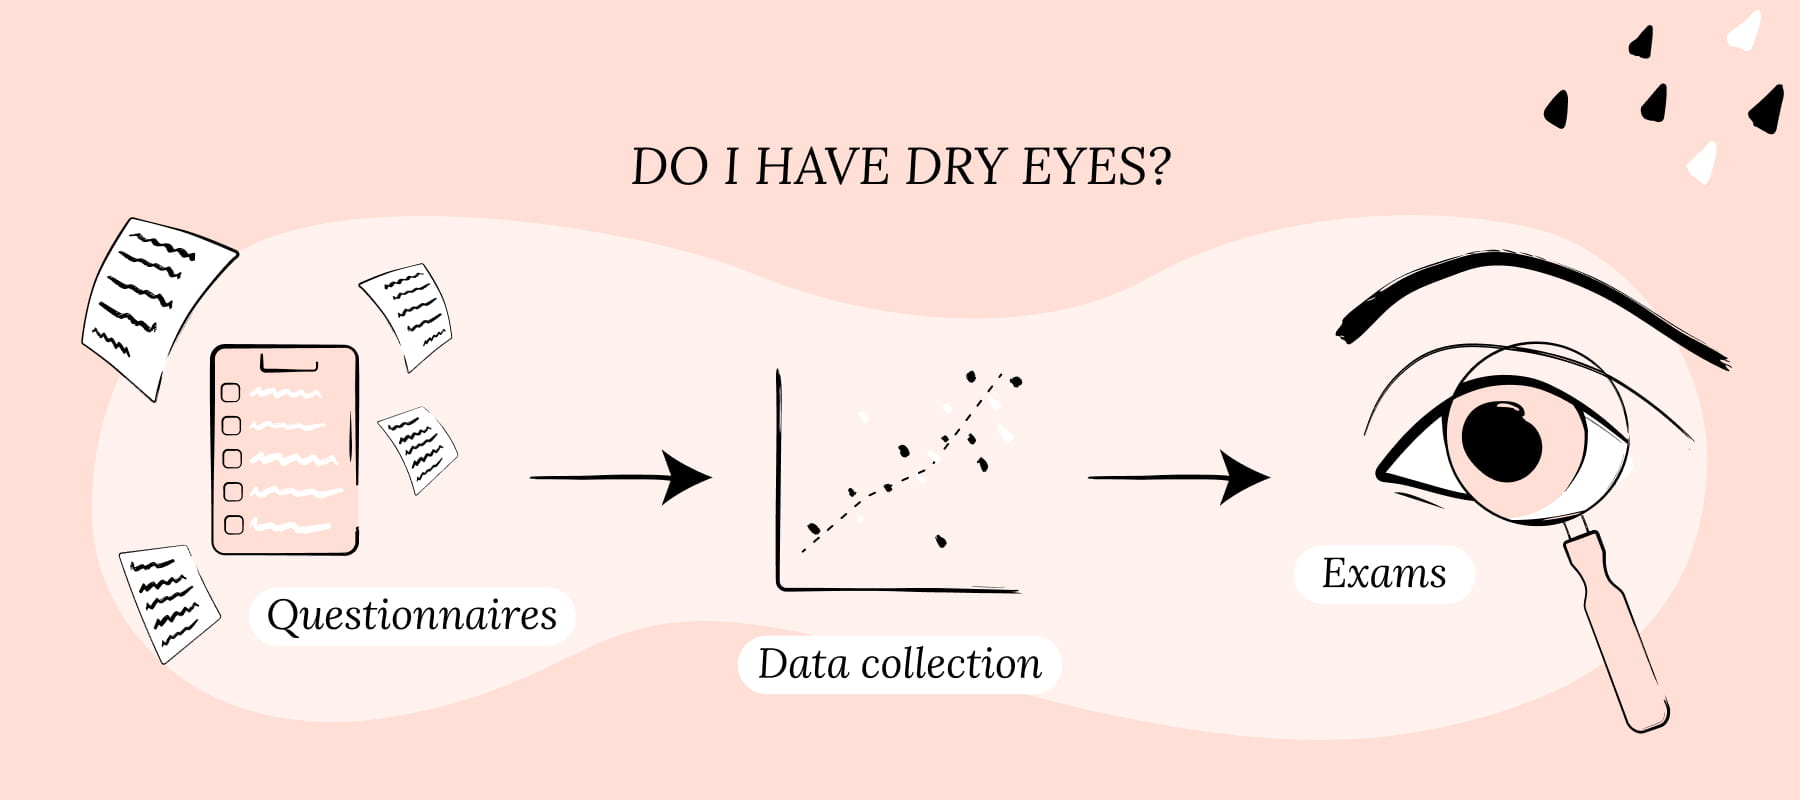 How to Diagnose Dry Eye Disease, Do I have dry eyes?